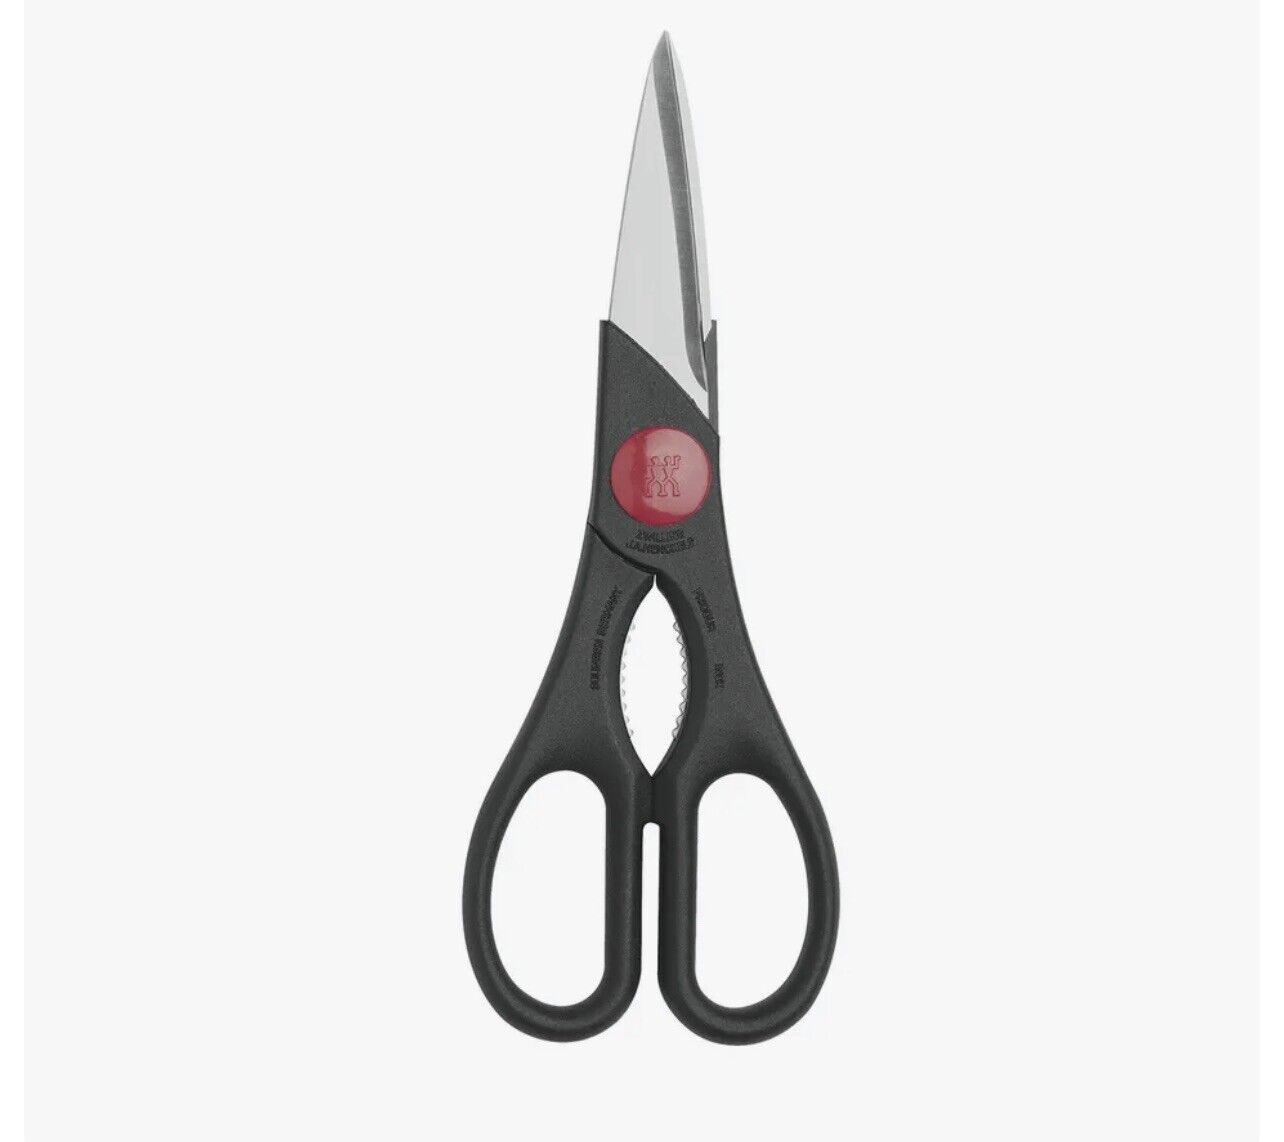 Zwilling Forged Multi-Purpose Kitchen Shears - Red